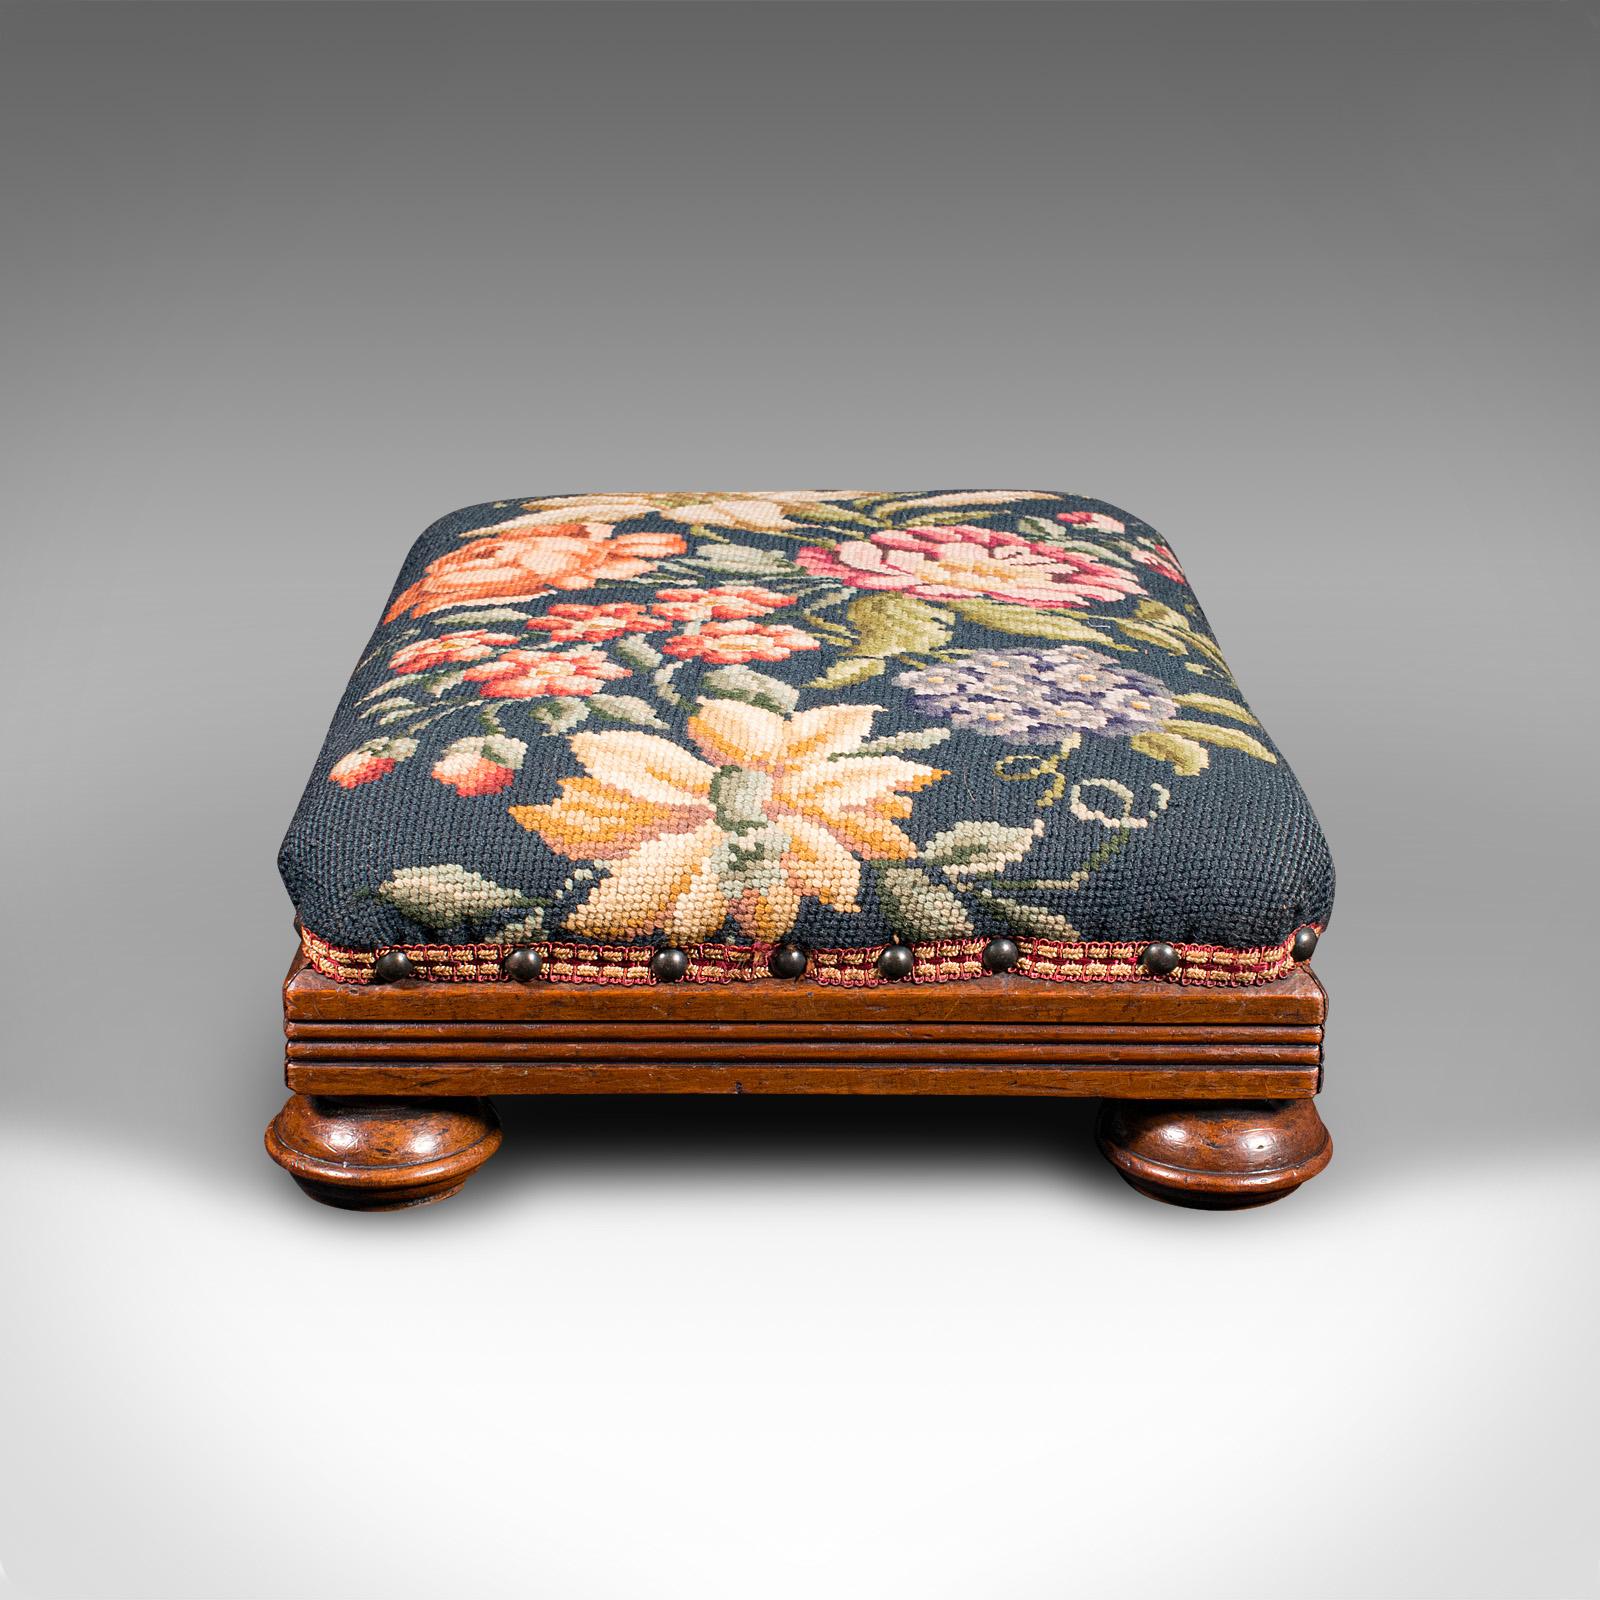 Antique Footstool, English, Needlepoint, Fireside Footrest, Stool, Victorian In Good Condition For Sale In Hele, Devon, GB